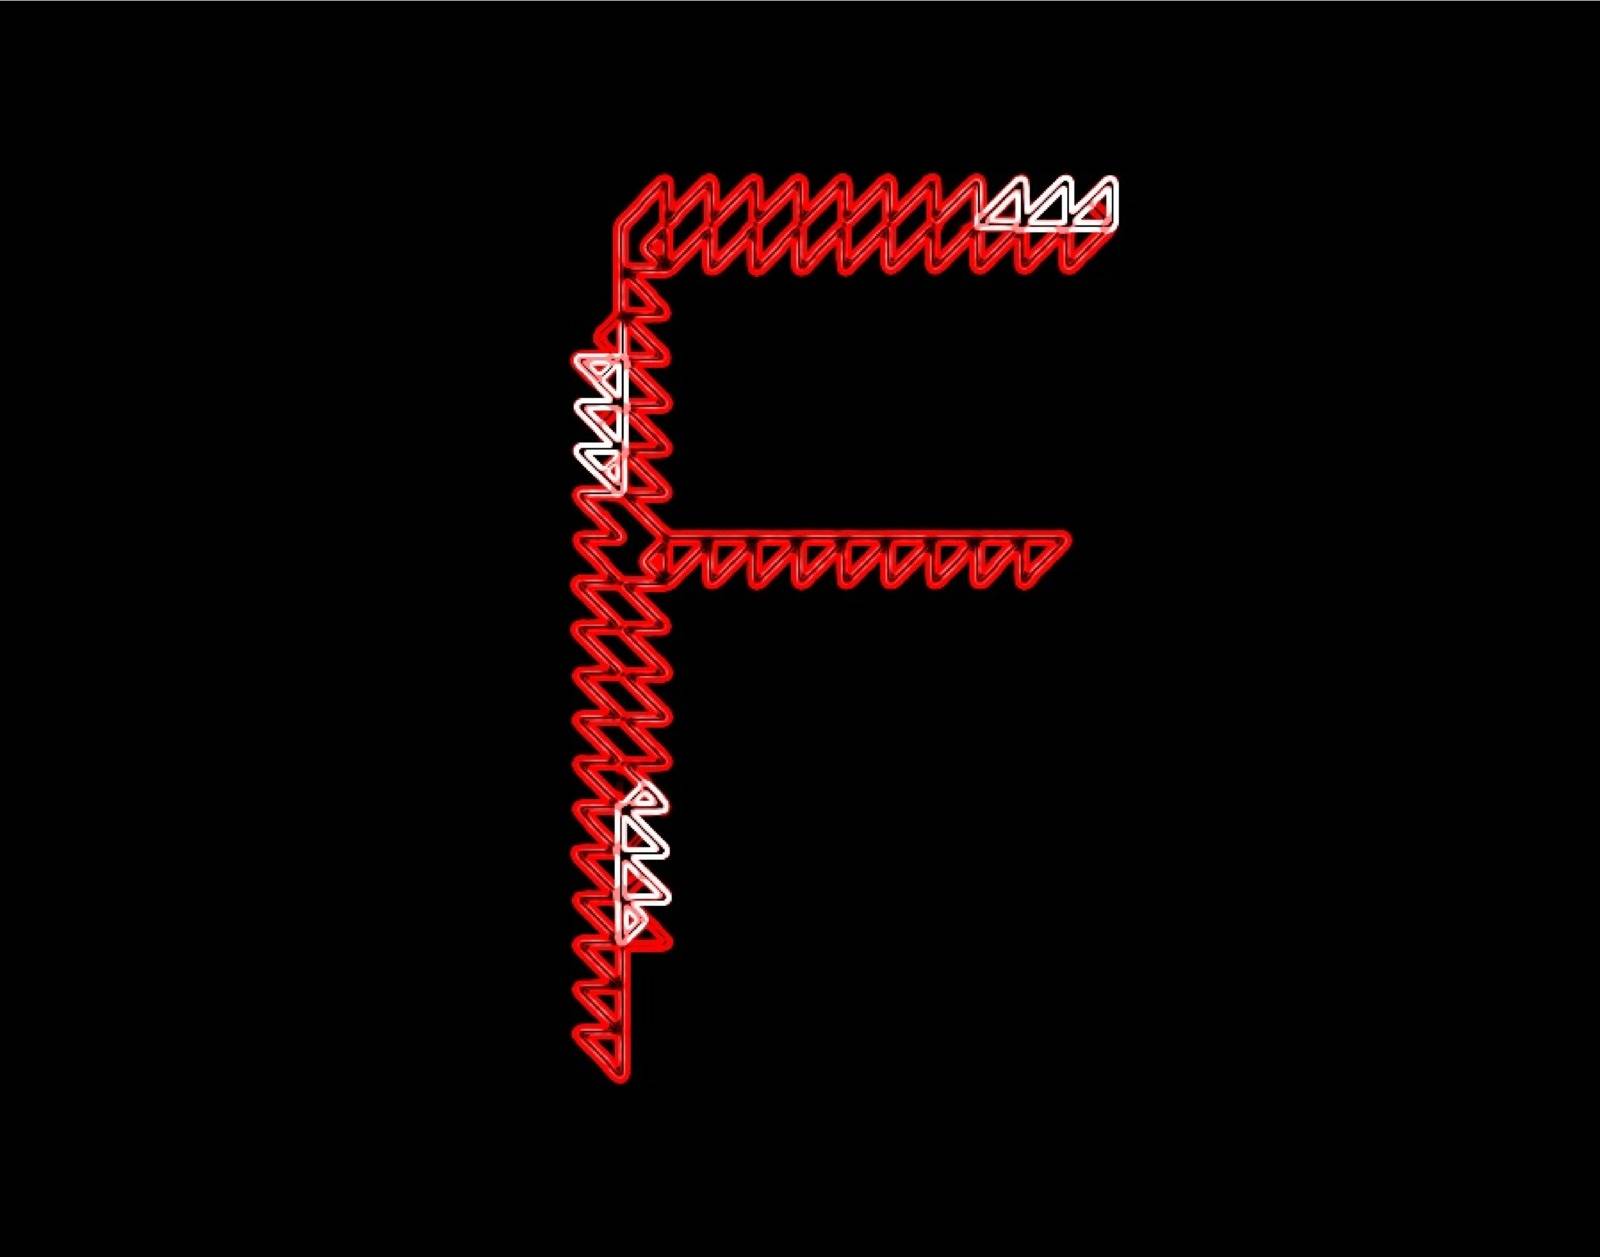 Letter F - Neon Jagged Version by jasonlee3071